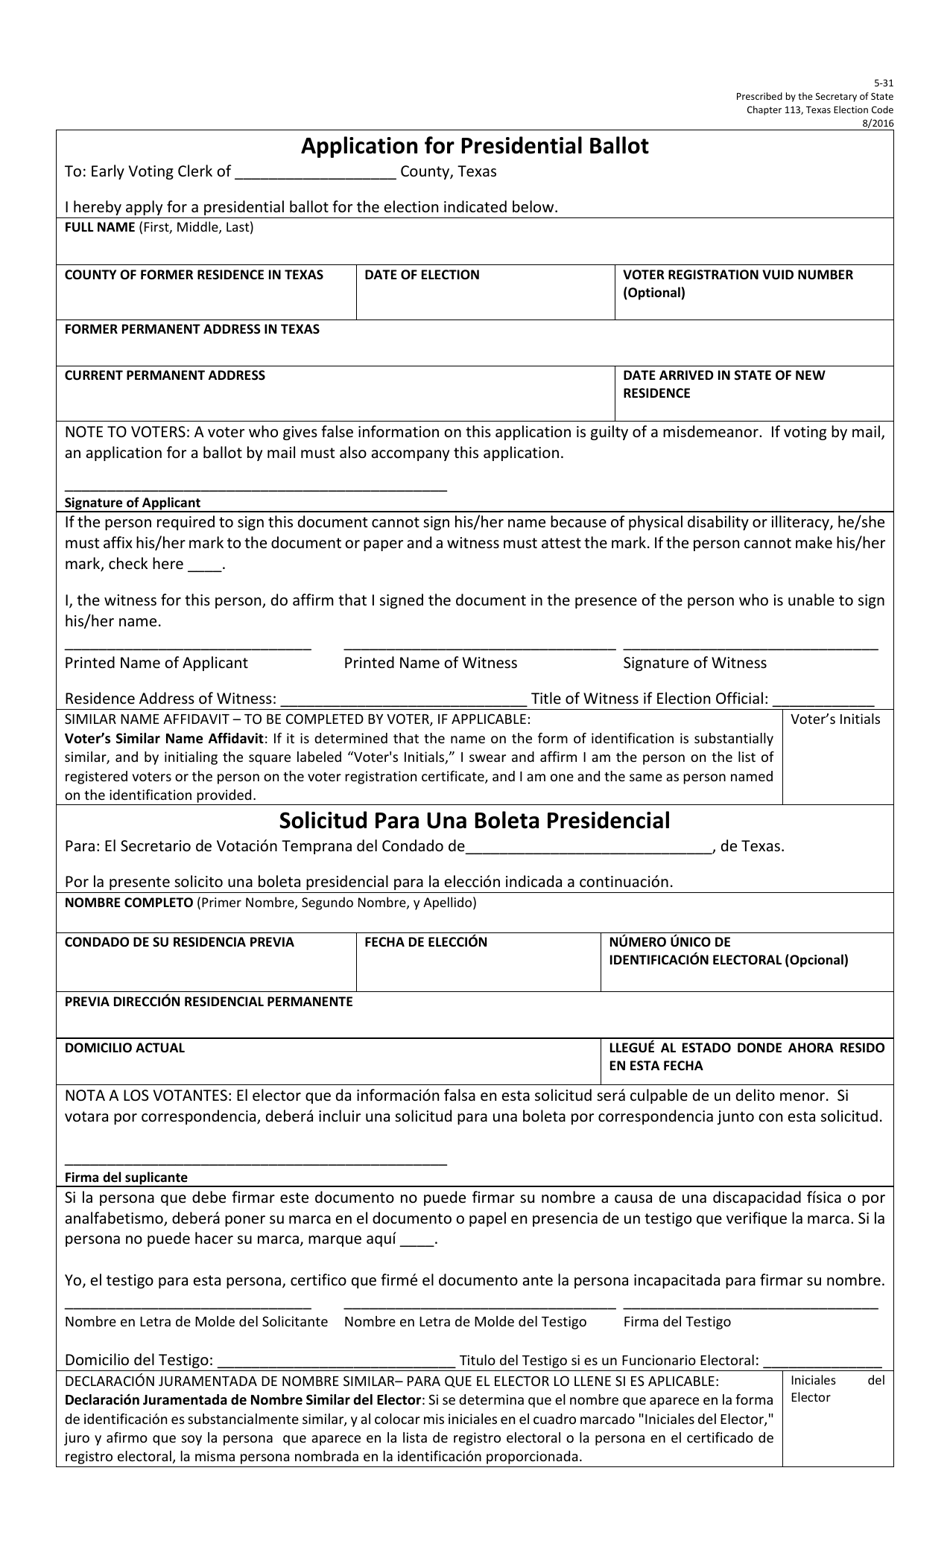 Form 5-31 Application for Presidential Ballot - Texas (English / Spanish), Page 1